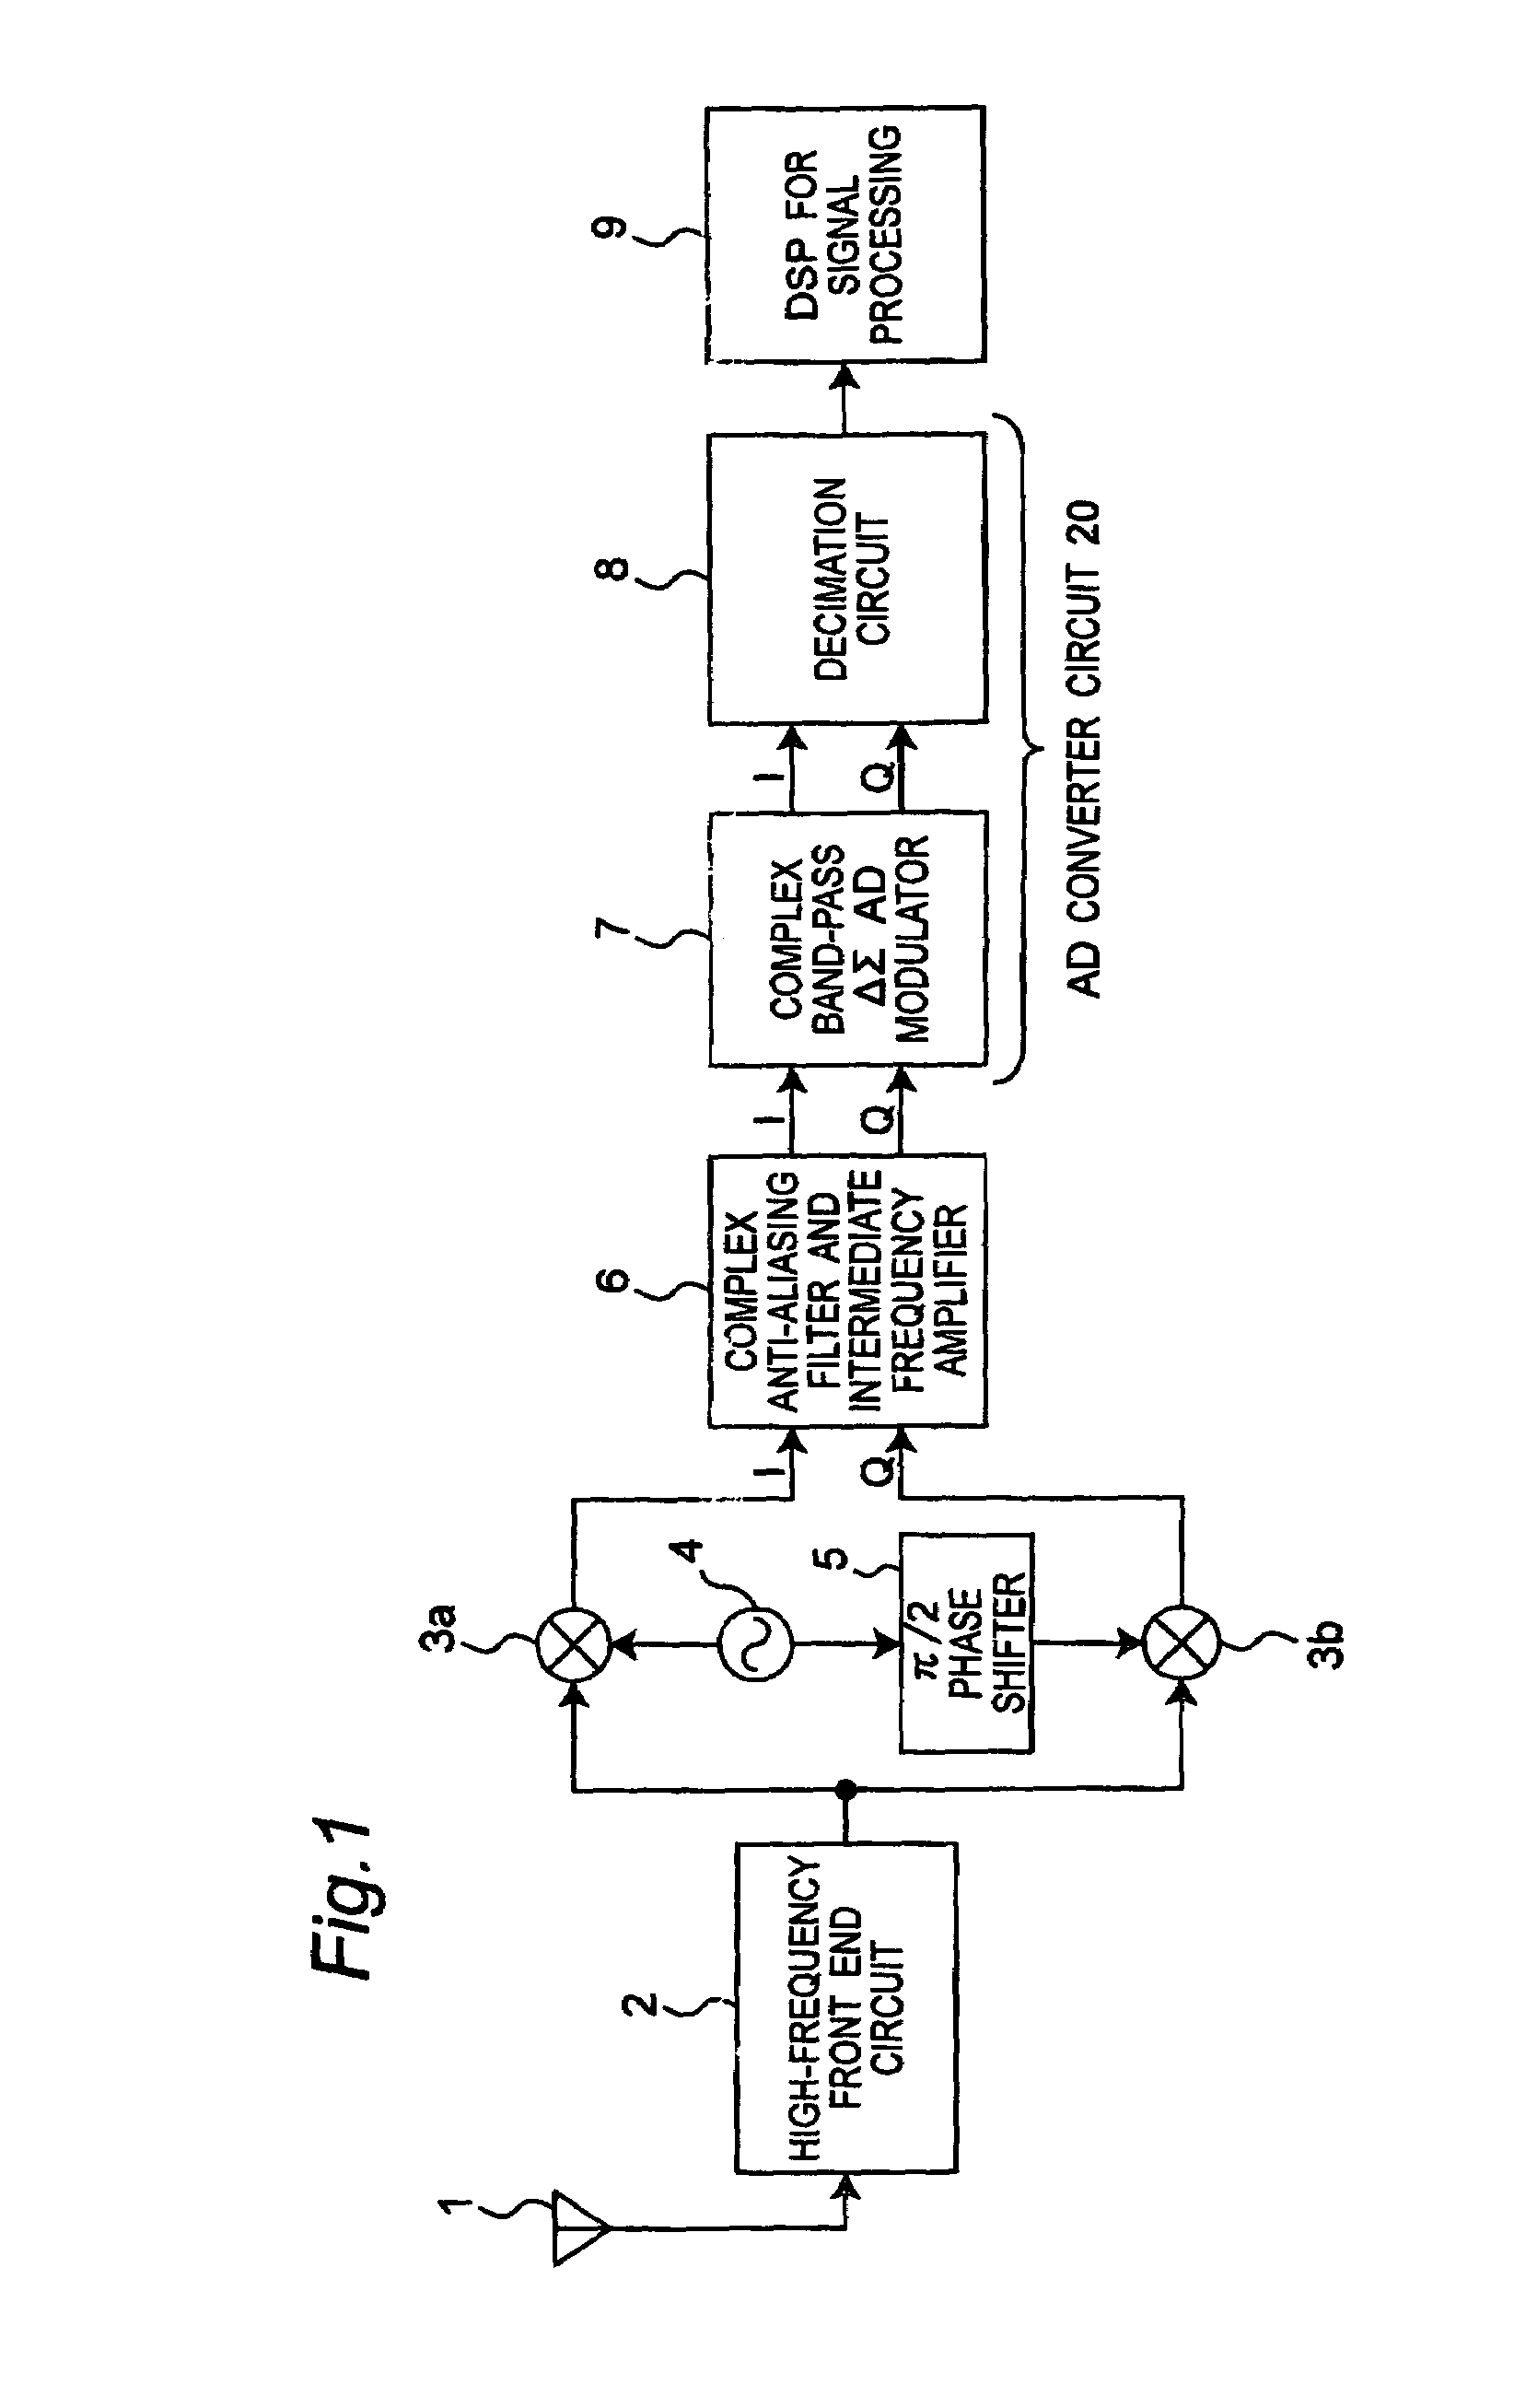 Complex band-pass DeltaSigma AD modulator for use in AD converter circuit